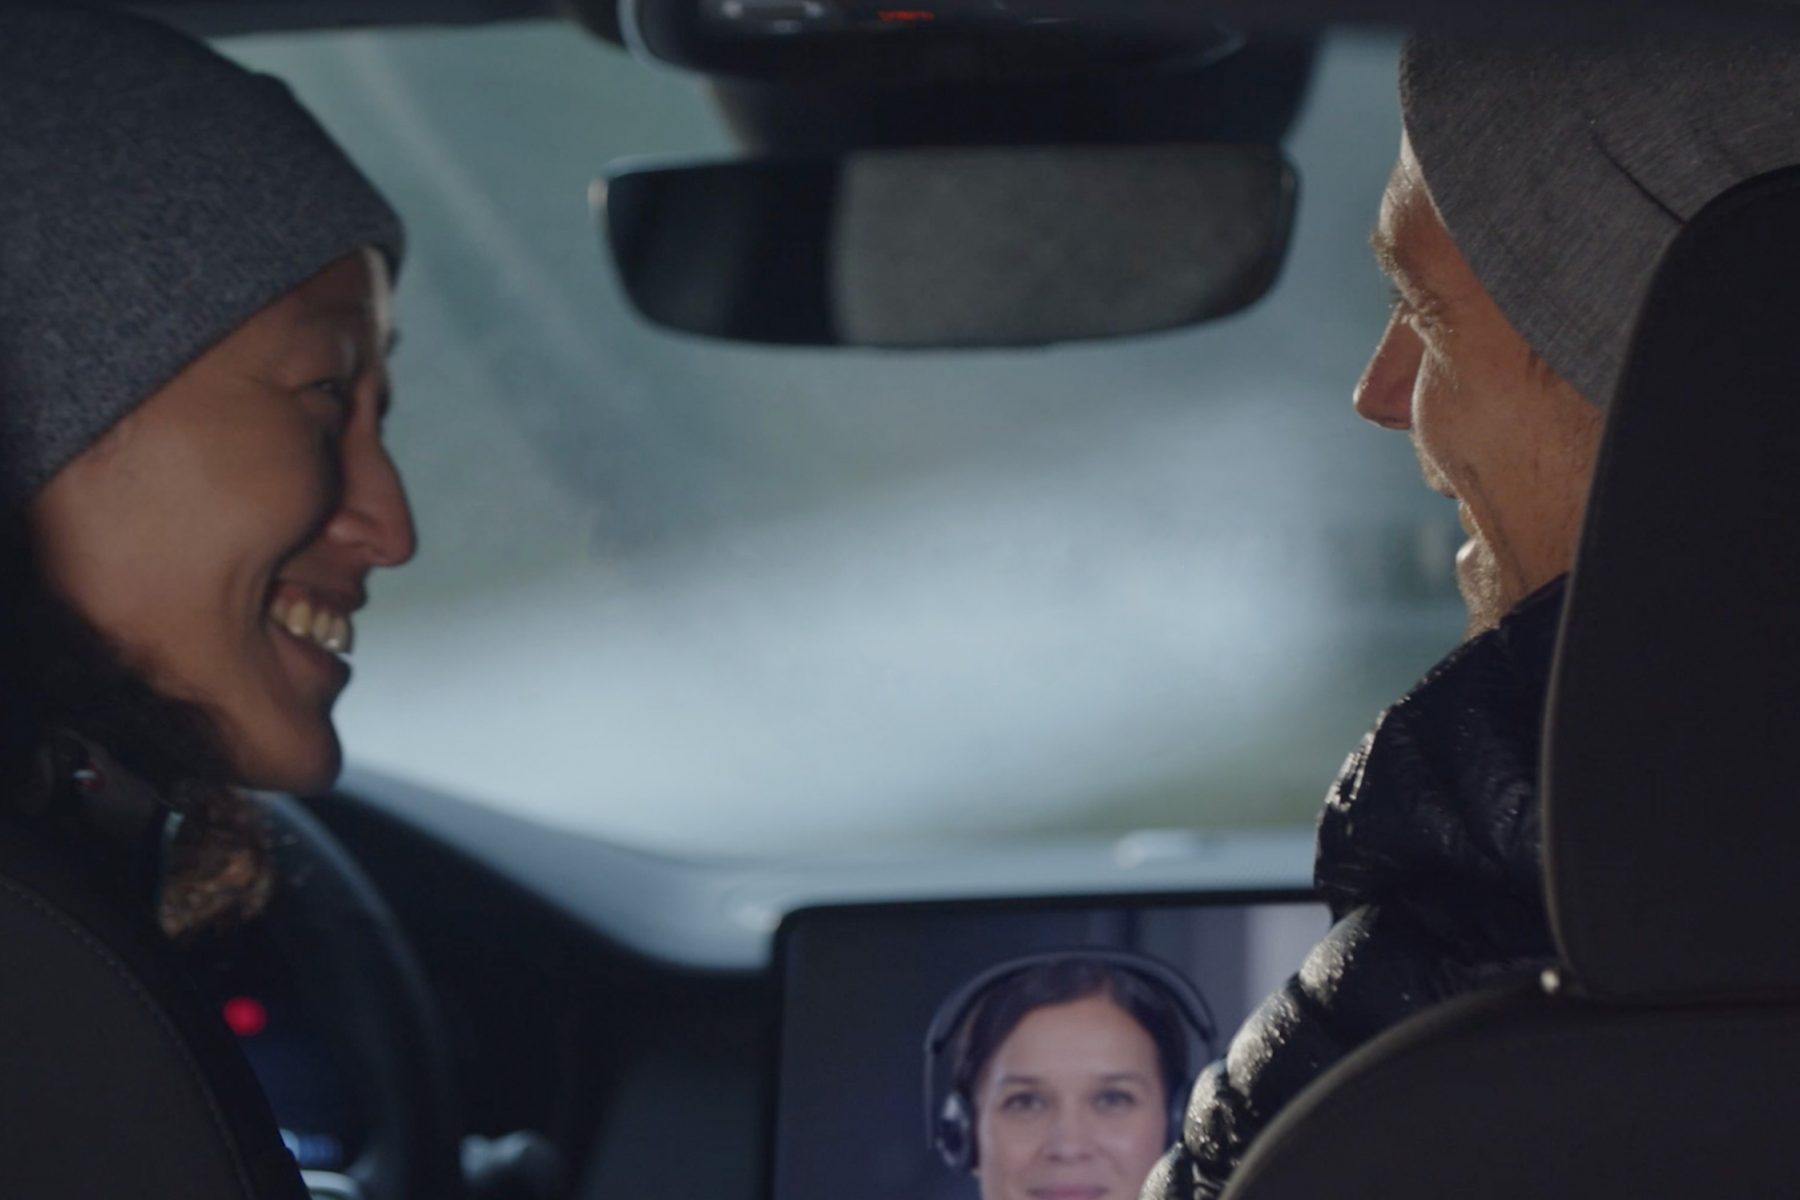 Two people facing each other smiling in front seat of car